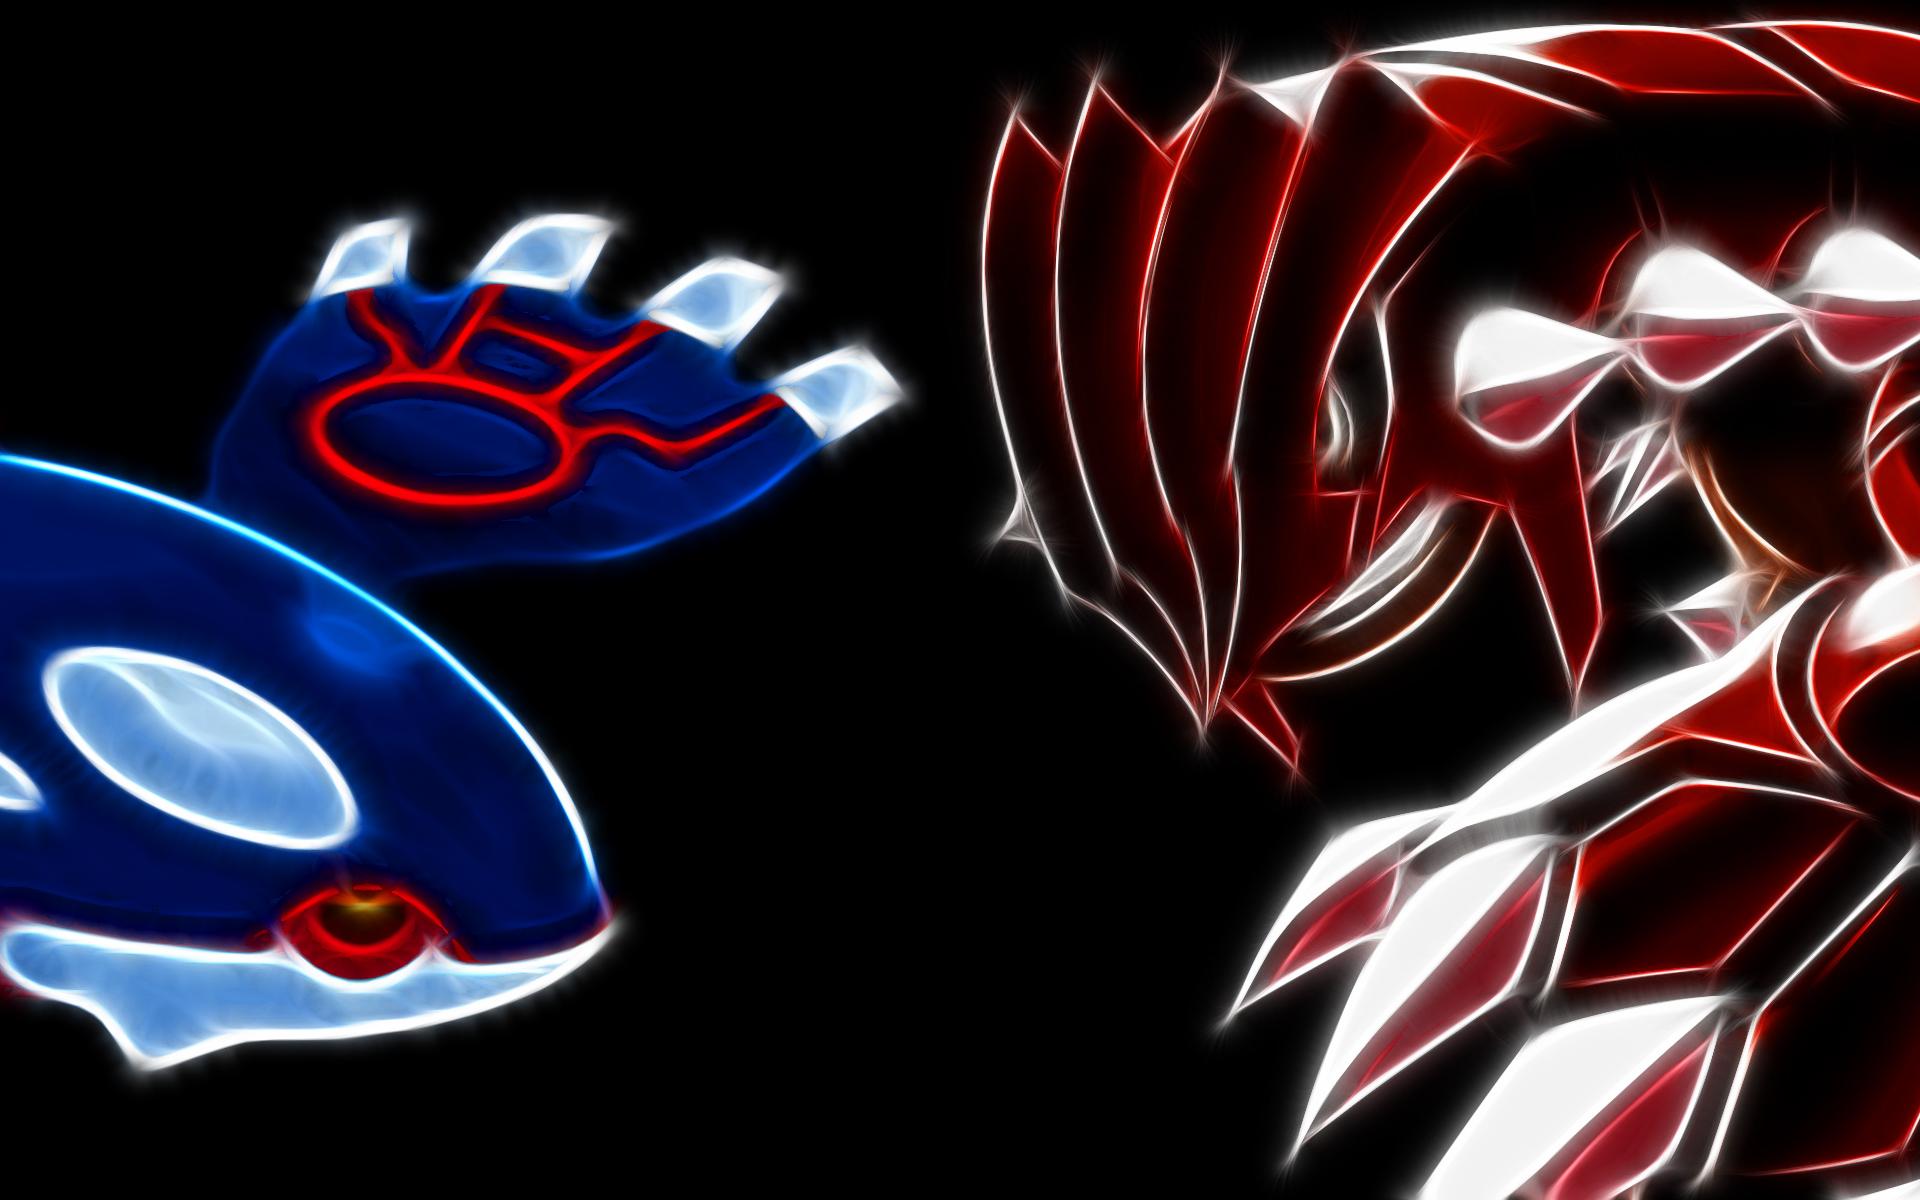 Groudon And Kyogre Wallpaper